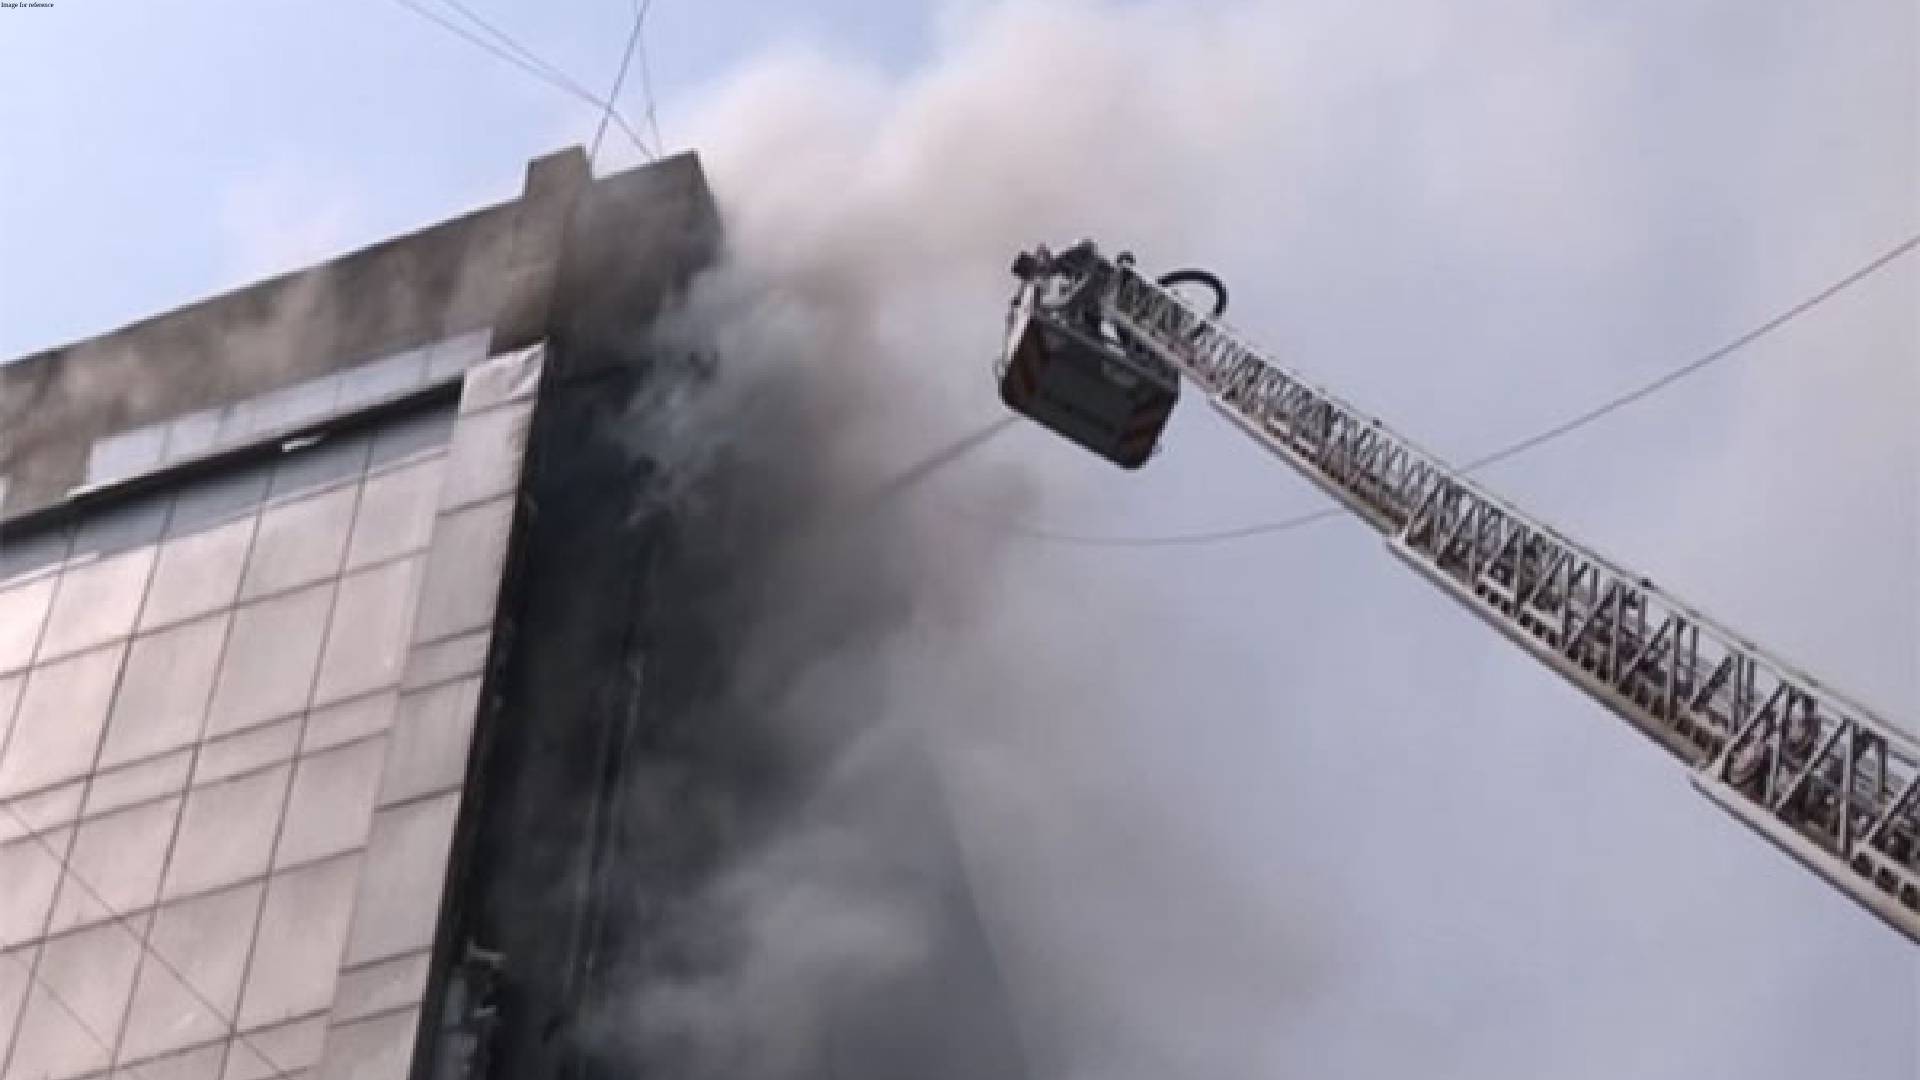 Mumbai: Fire breaks out at garment shop in Dindoshi area of Malad East